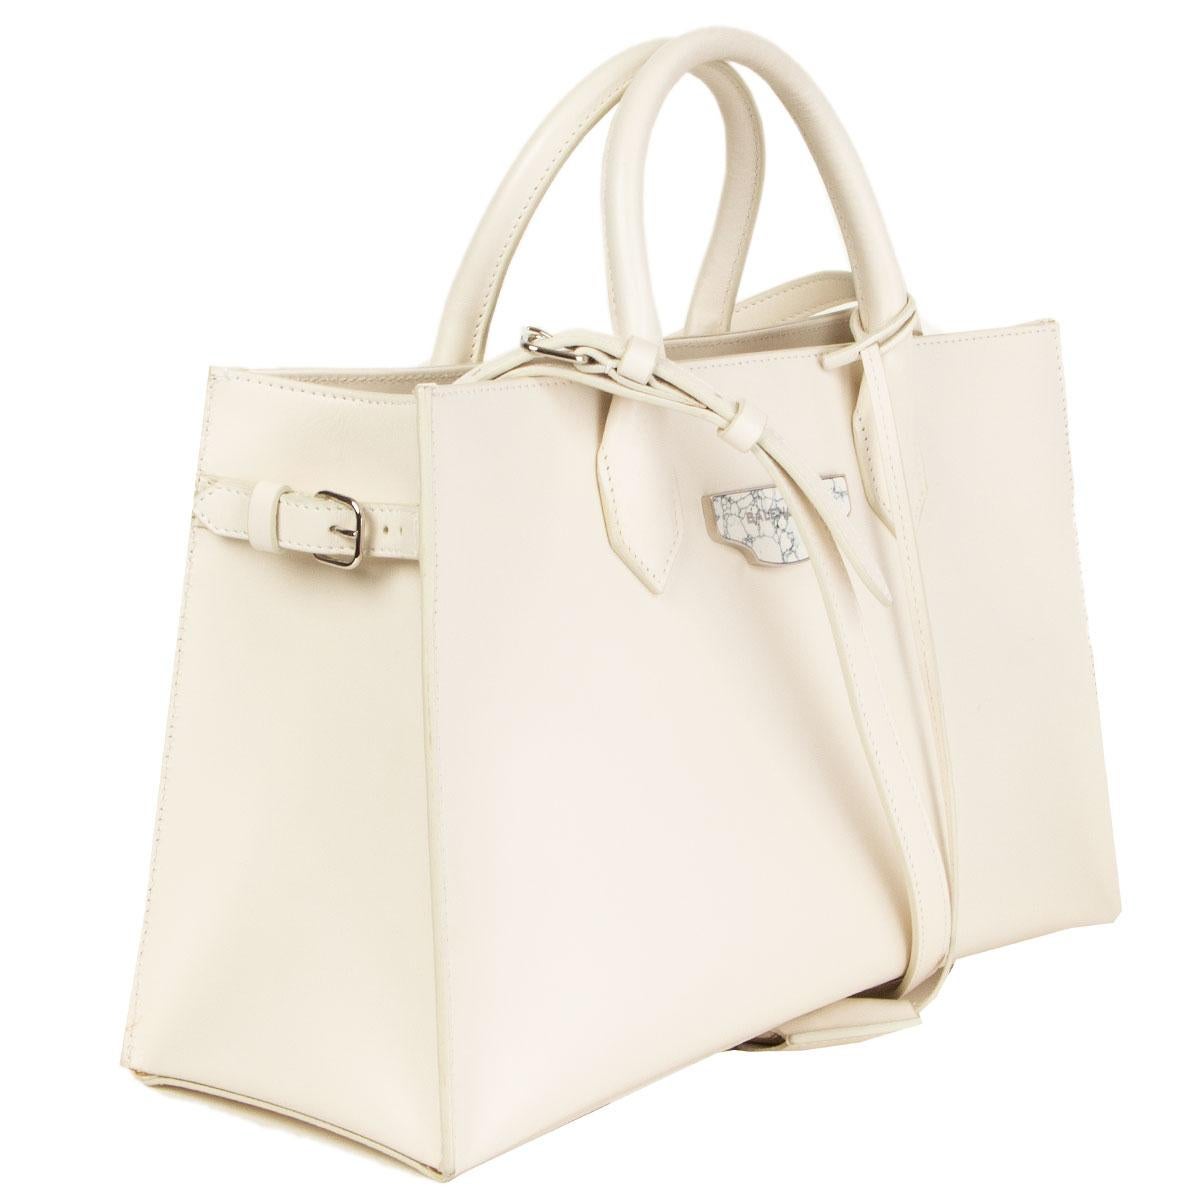 100% authentic Balenciaga tote bag in off-white leather comes with top handles, detachable and adjustable shoulder strap. Features buckle details at the sides. Has a zipped and a slot pocket including a detachable framed mirror on the inside. Lined